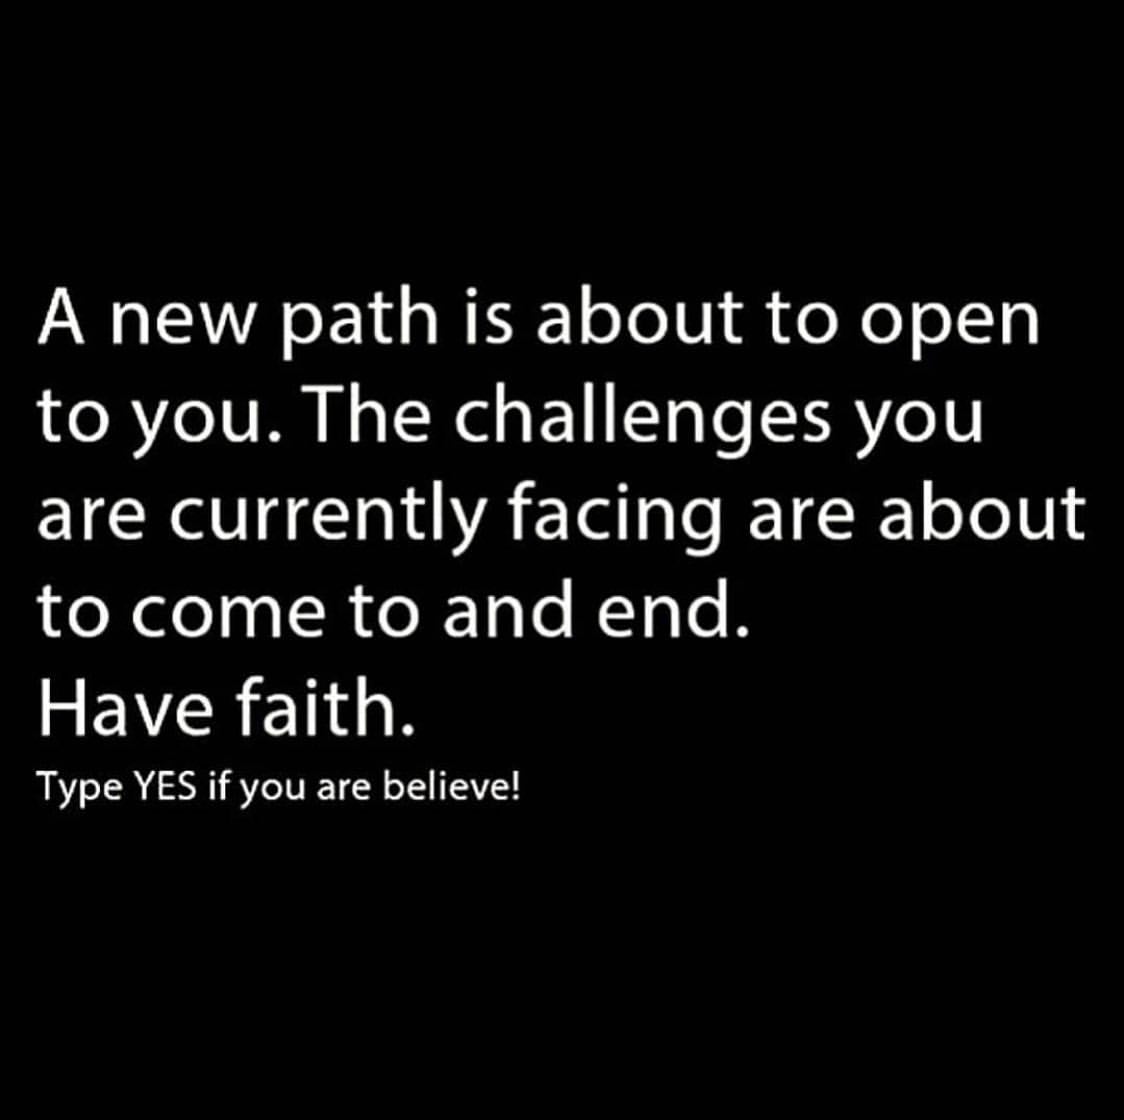 A new path is about to open to you. The challenges you are currently facing are about to come to and end. Have faith.